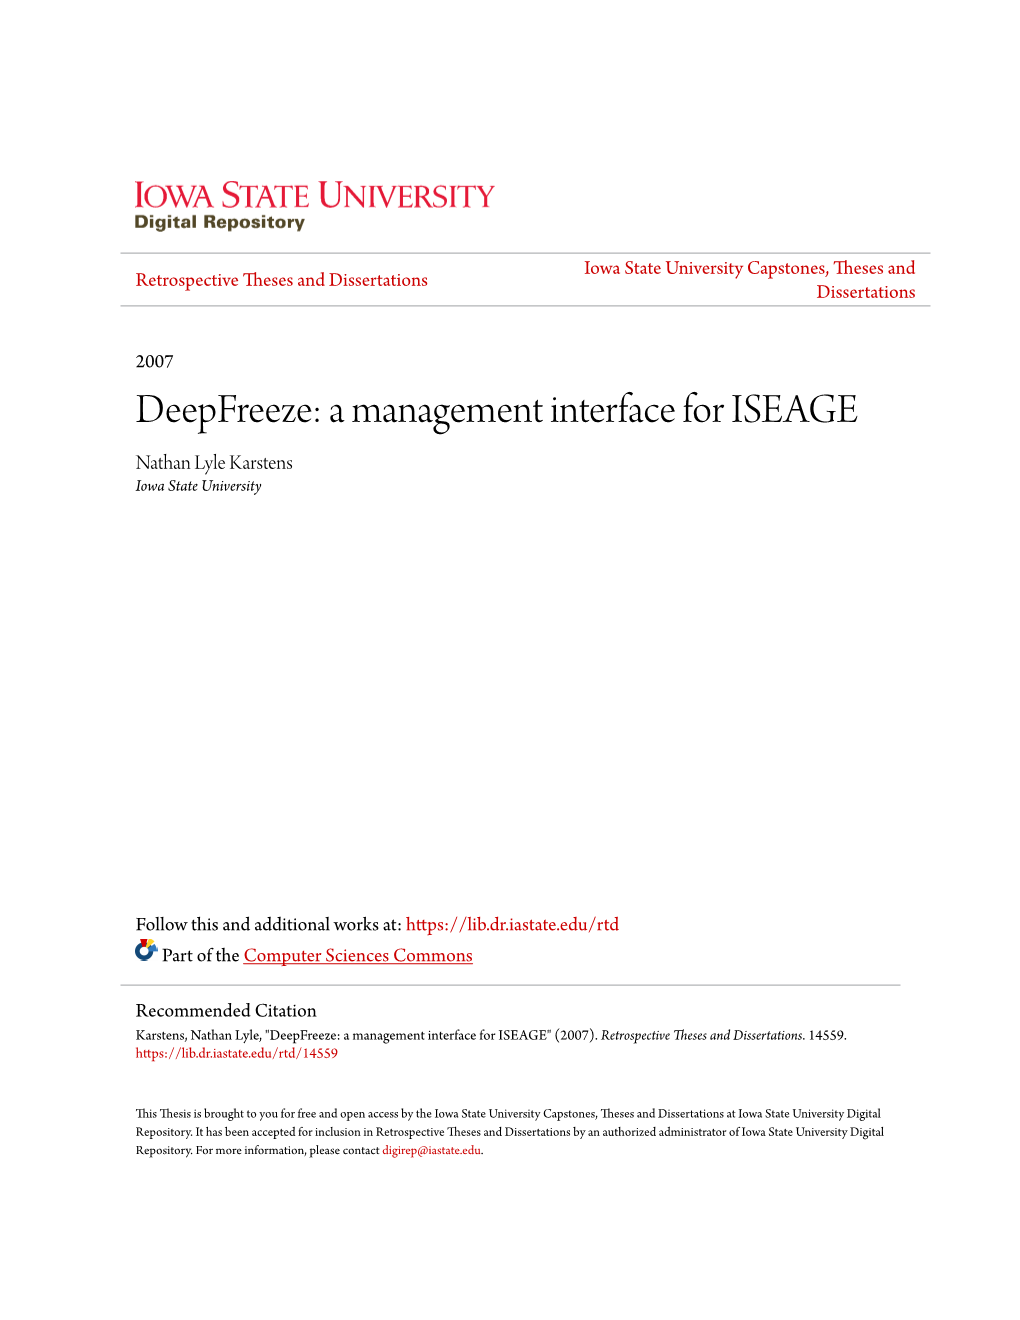 Deepfreeze: a Management Interface for ISEAGE Nathan Lyle Karstens Iowa State University